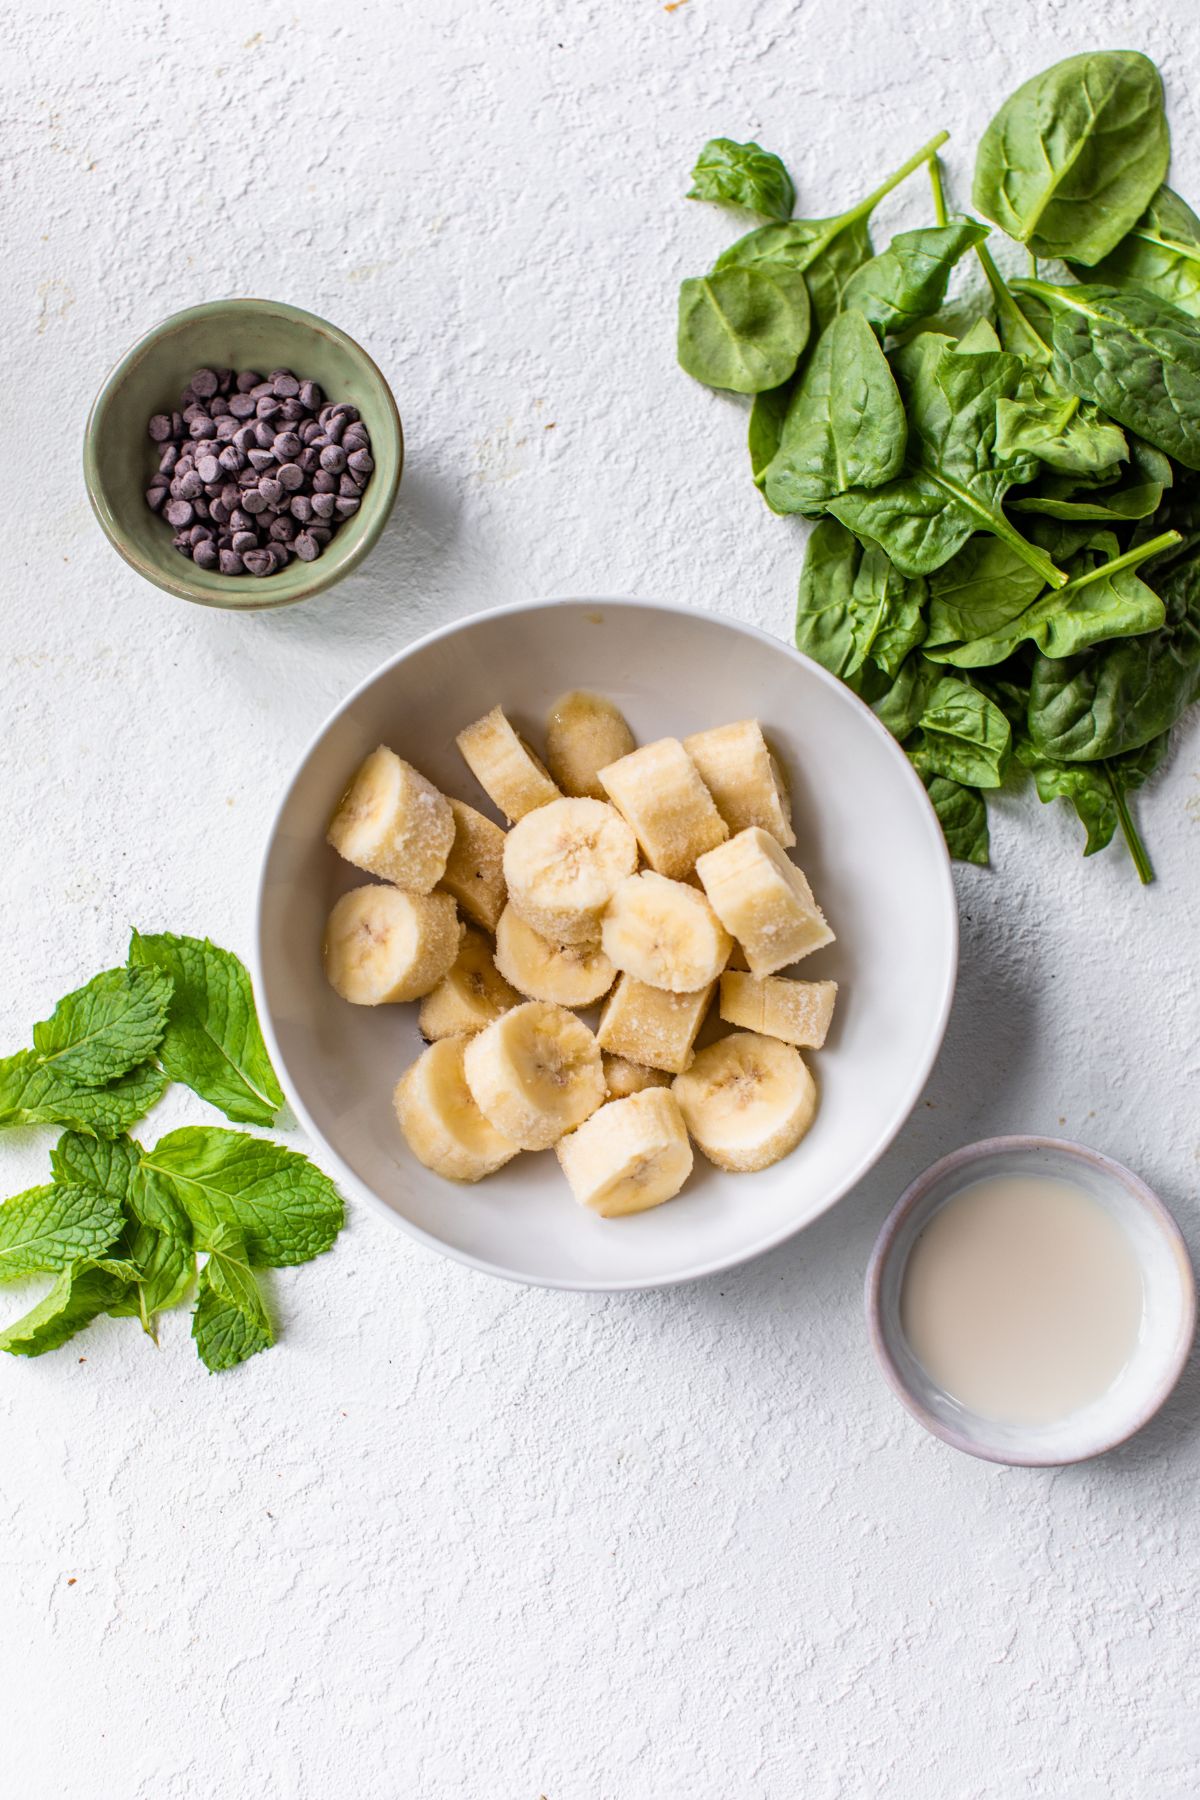 Ingredients needed to make mint chocolate chip banana nice cream divided into bowls.